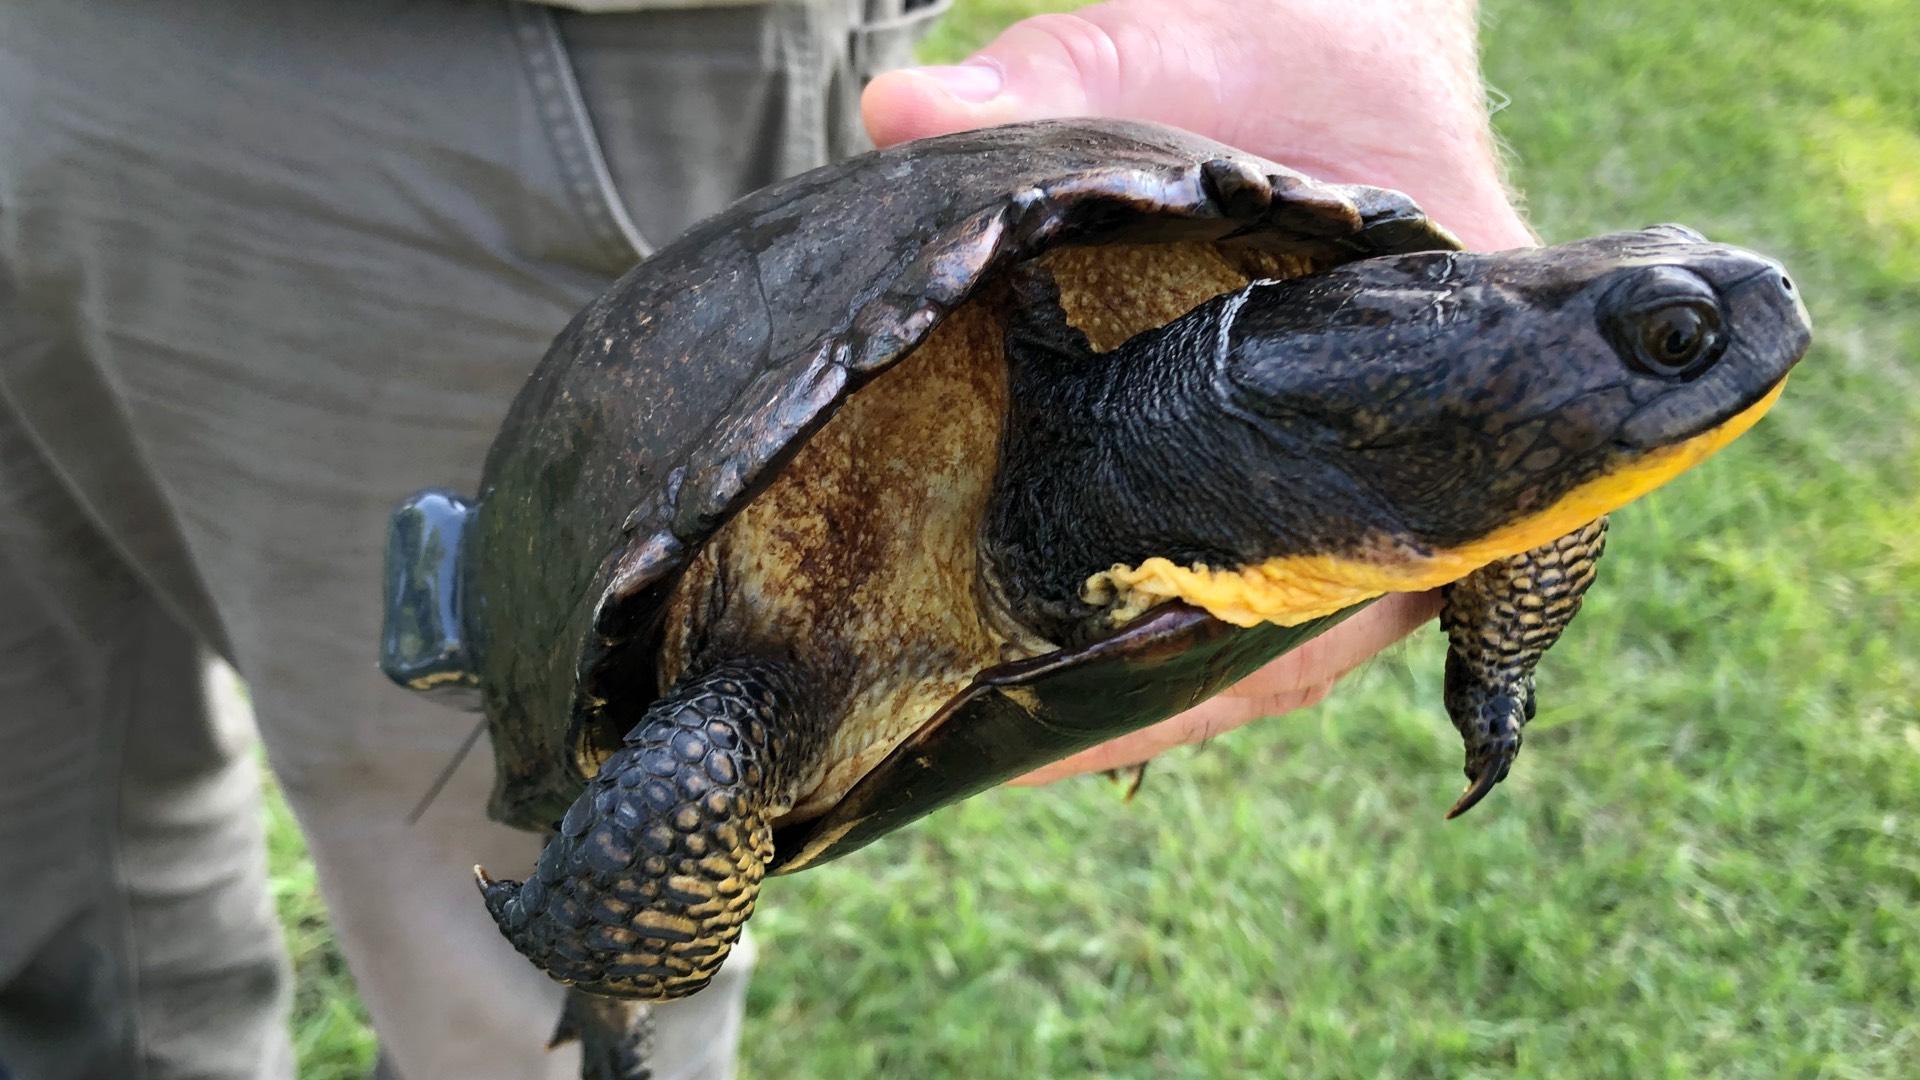 An adult Blanding's turtle, with its telltale yellow chin and throat, makes its home in a Cook County forest preserve wetland. (Patty Wetli / WTTW News)